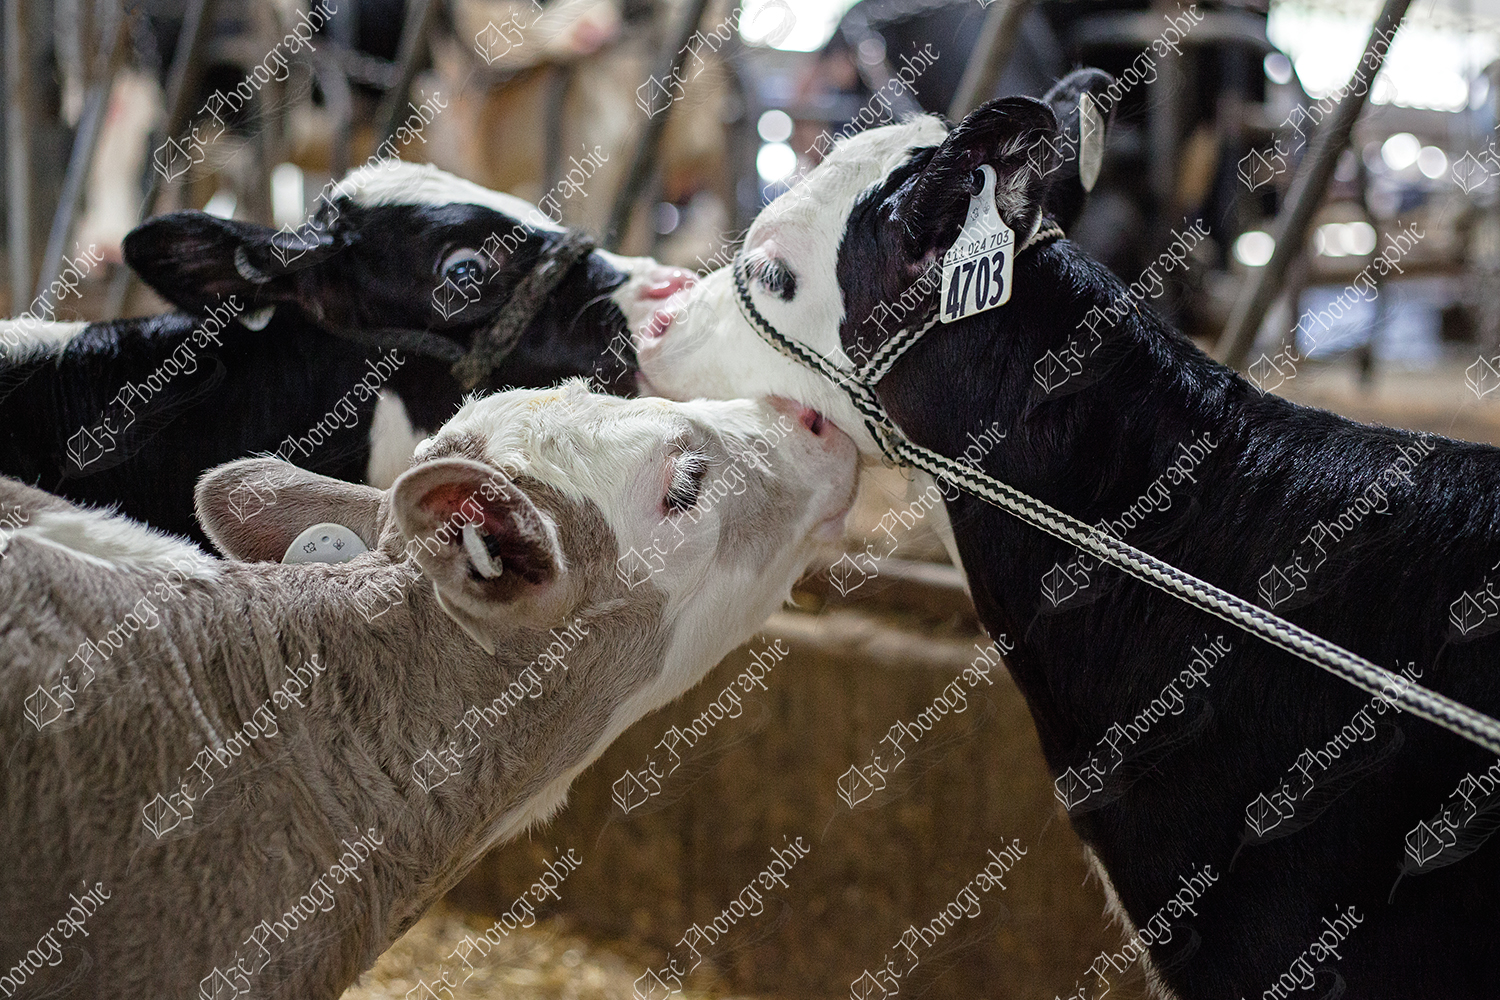 elze_photo_8573_groupe_veaux_bebe_calf_playing